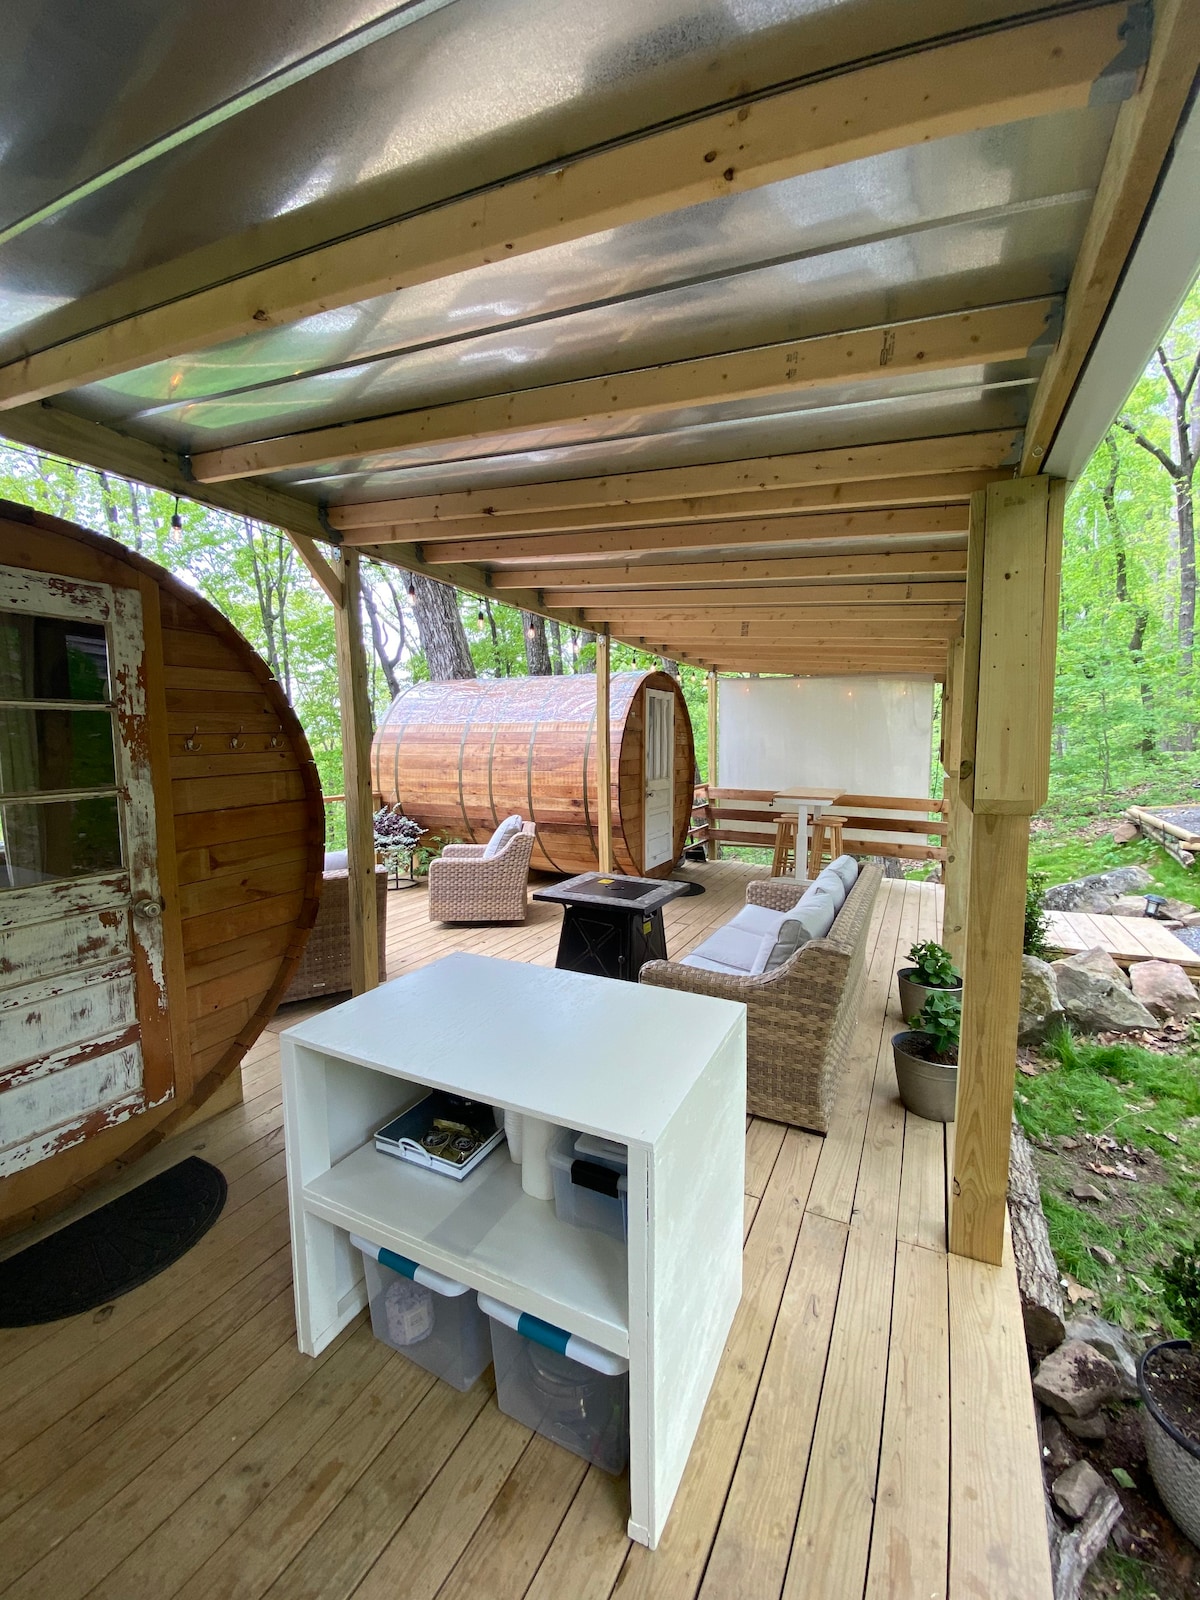 Treehouse Glamp Design with Amazing Views!